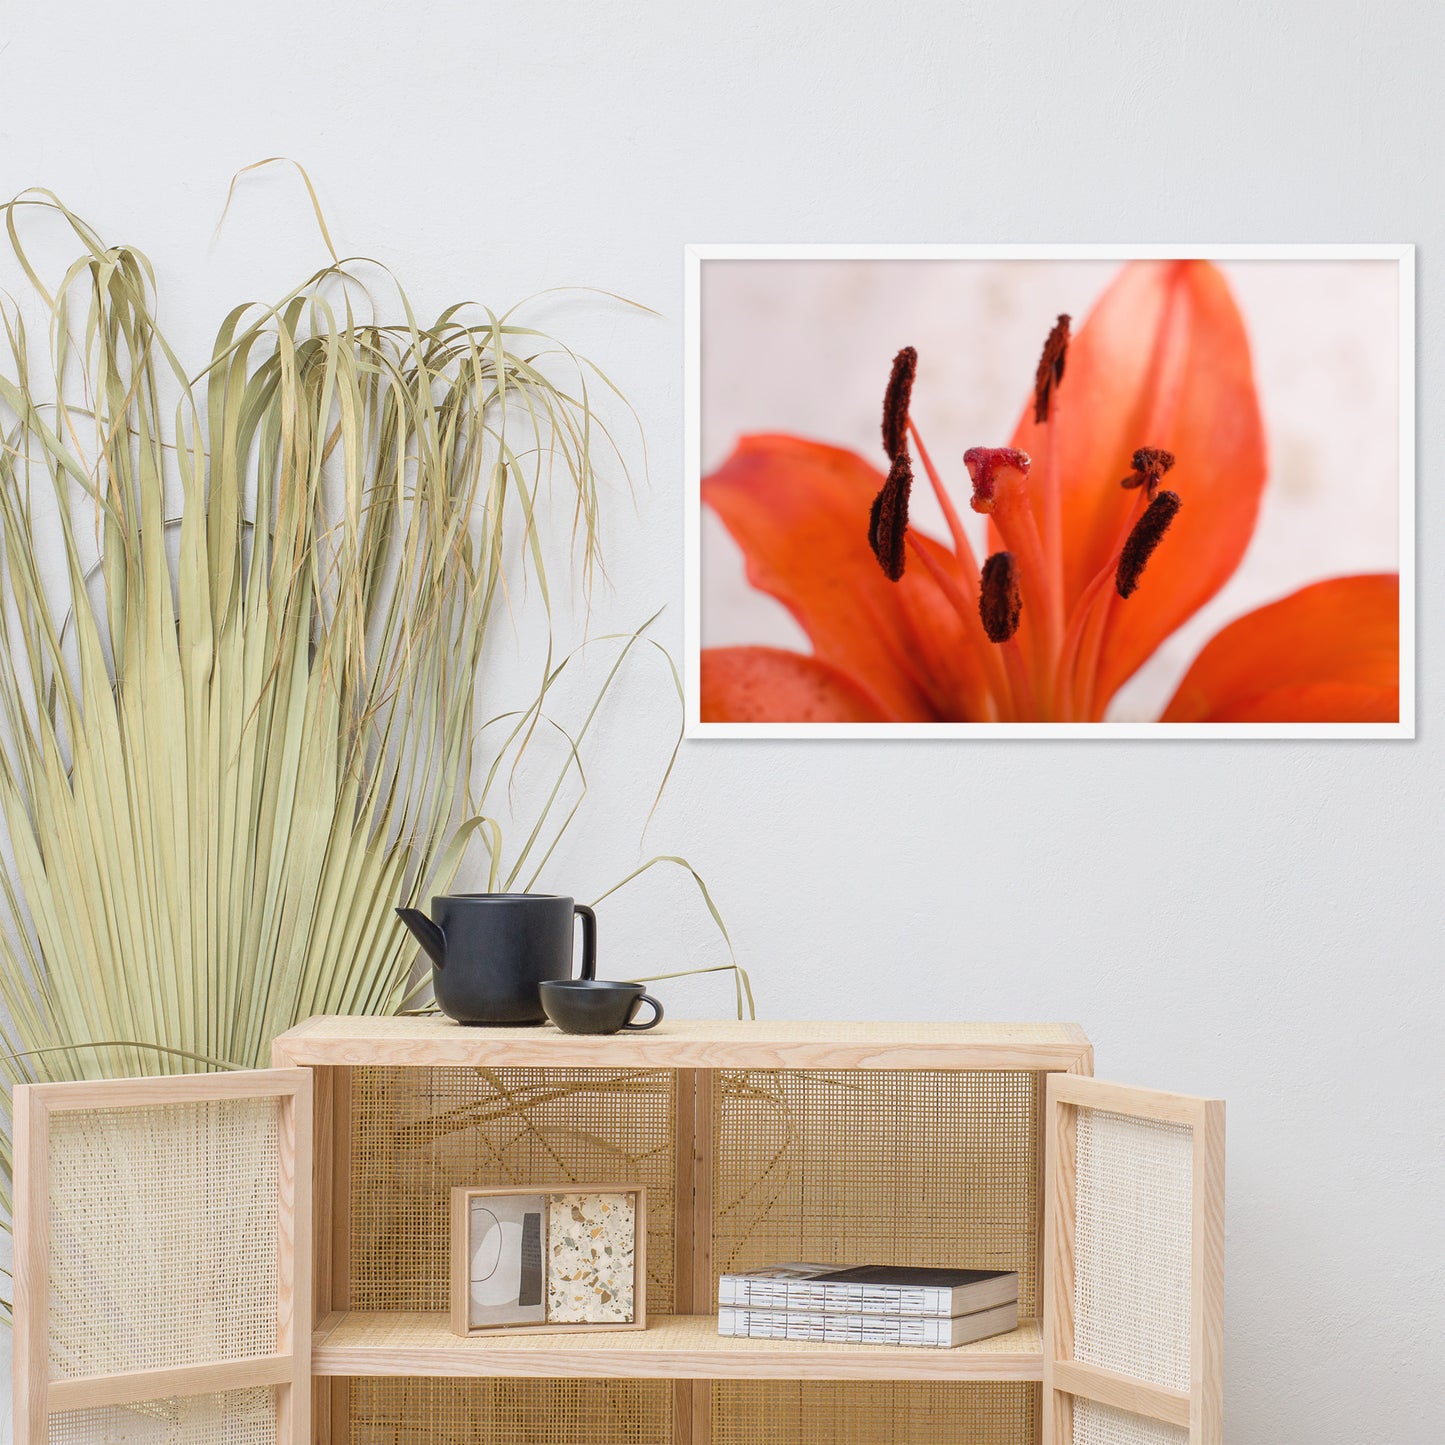 Lily Stigma Floral Nature Photo Framed Wall Art Print